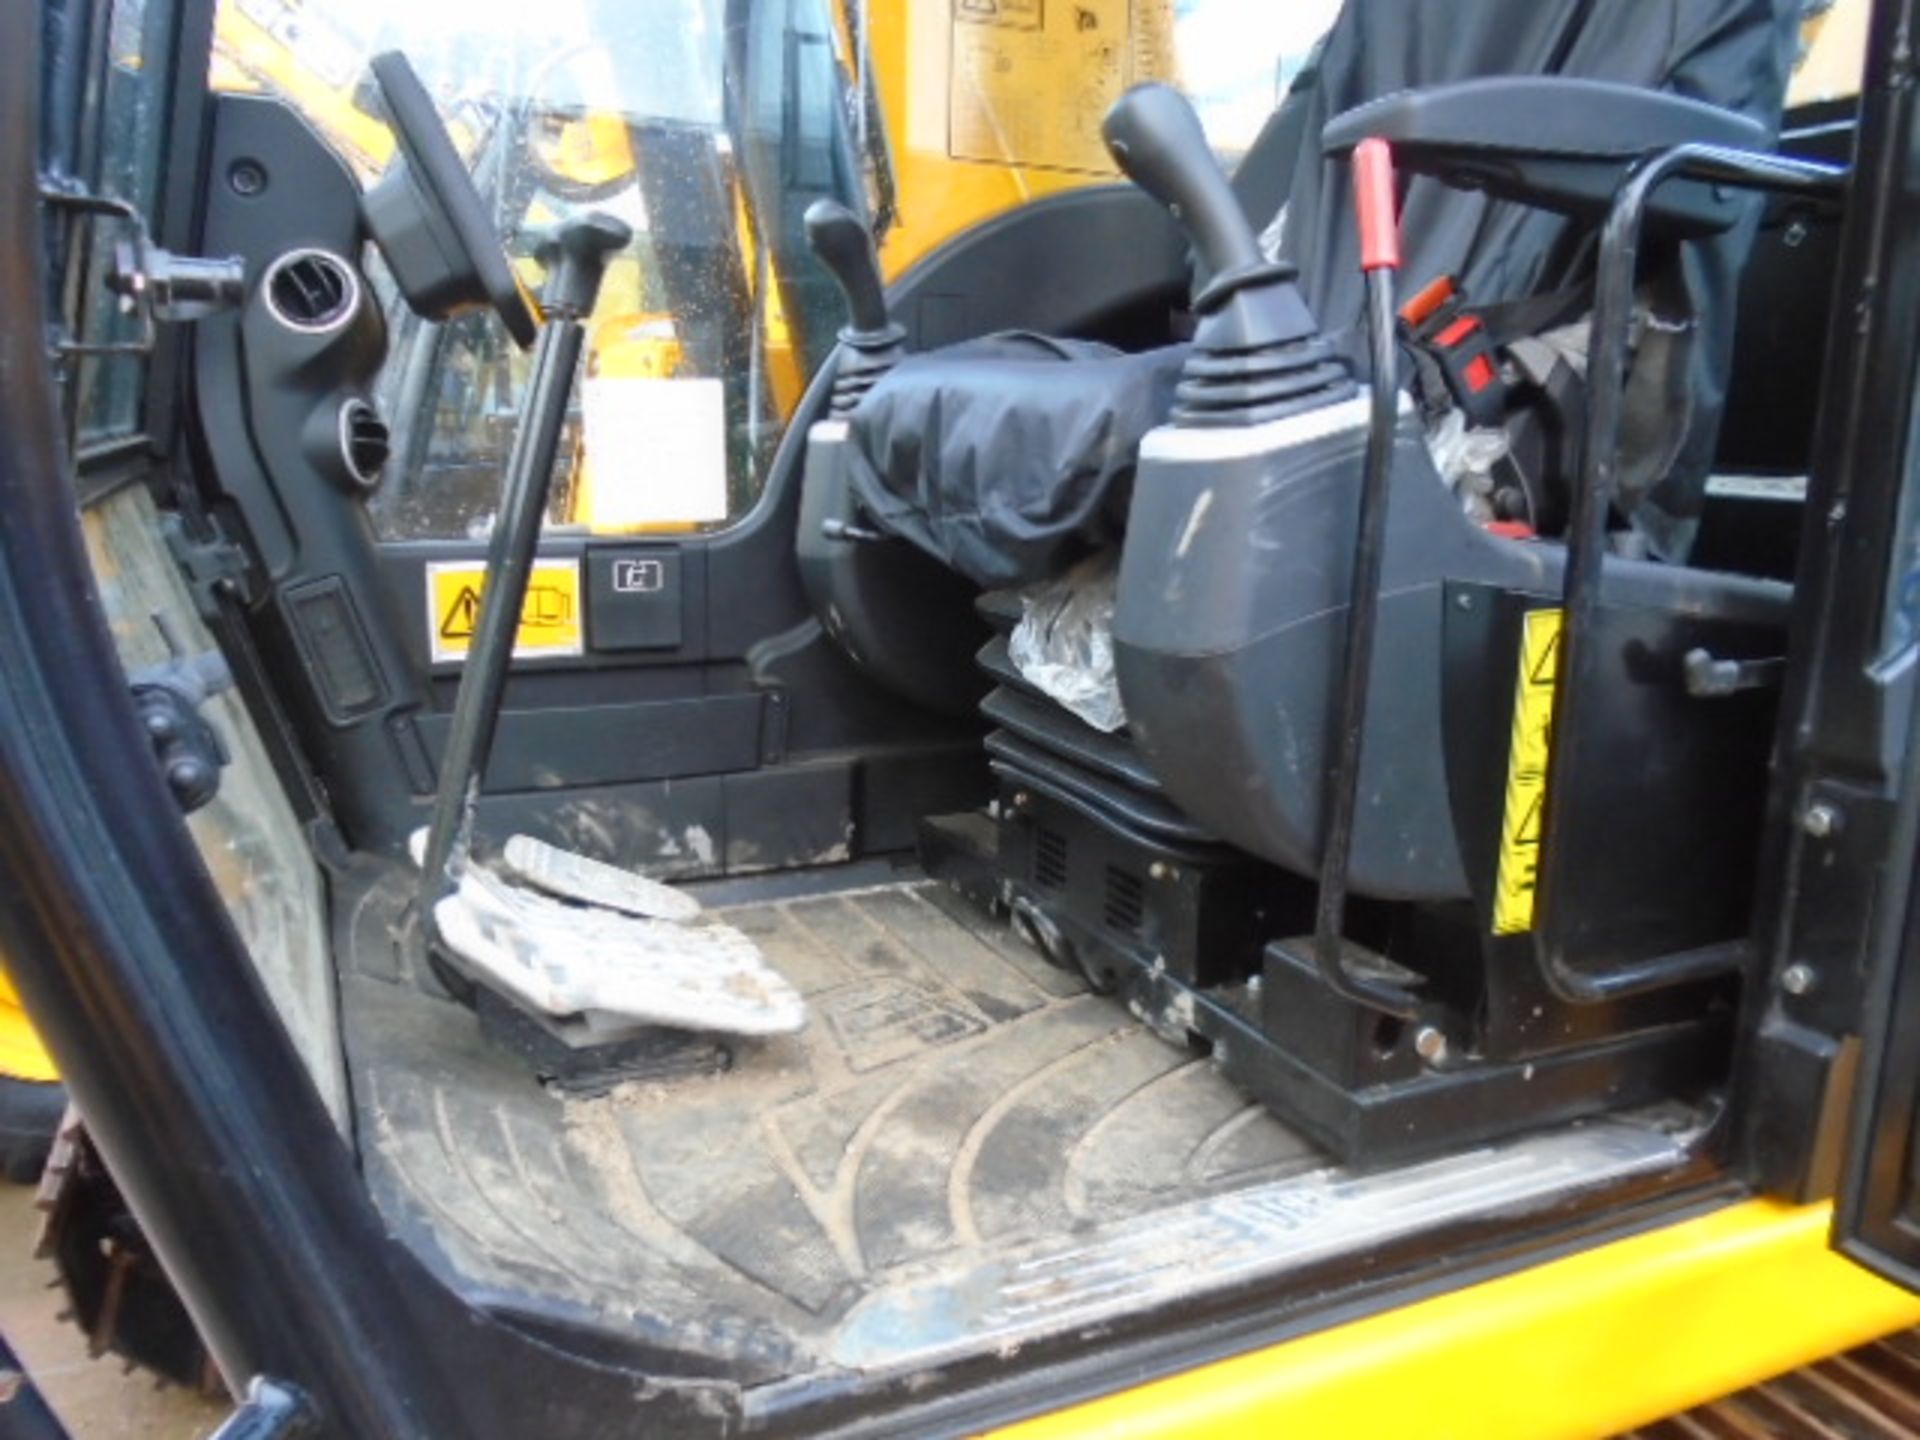 JCB JZ141LC 4F Tracked Excavator, serial no. 24796 - Image 7 of 9